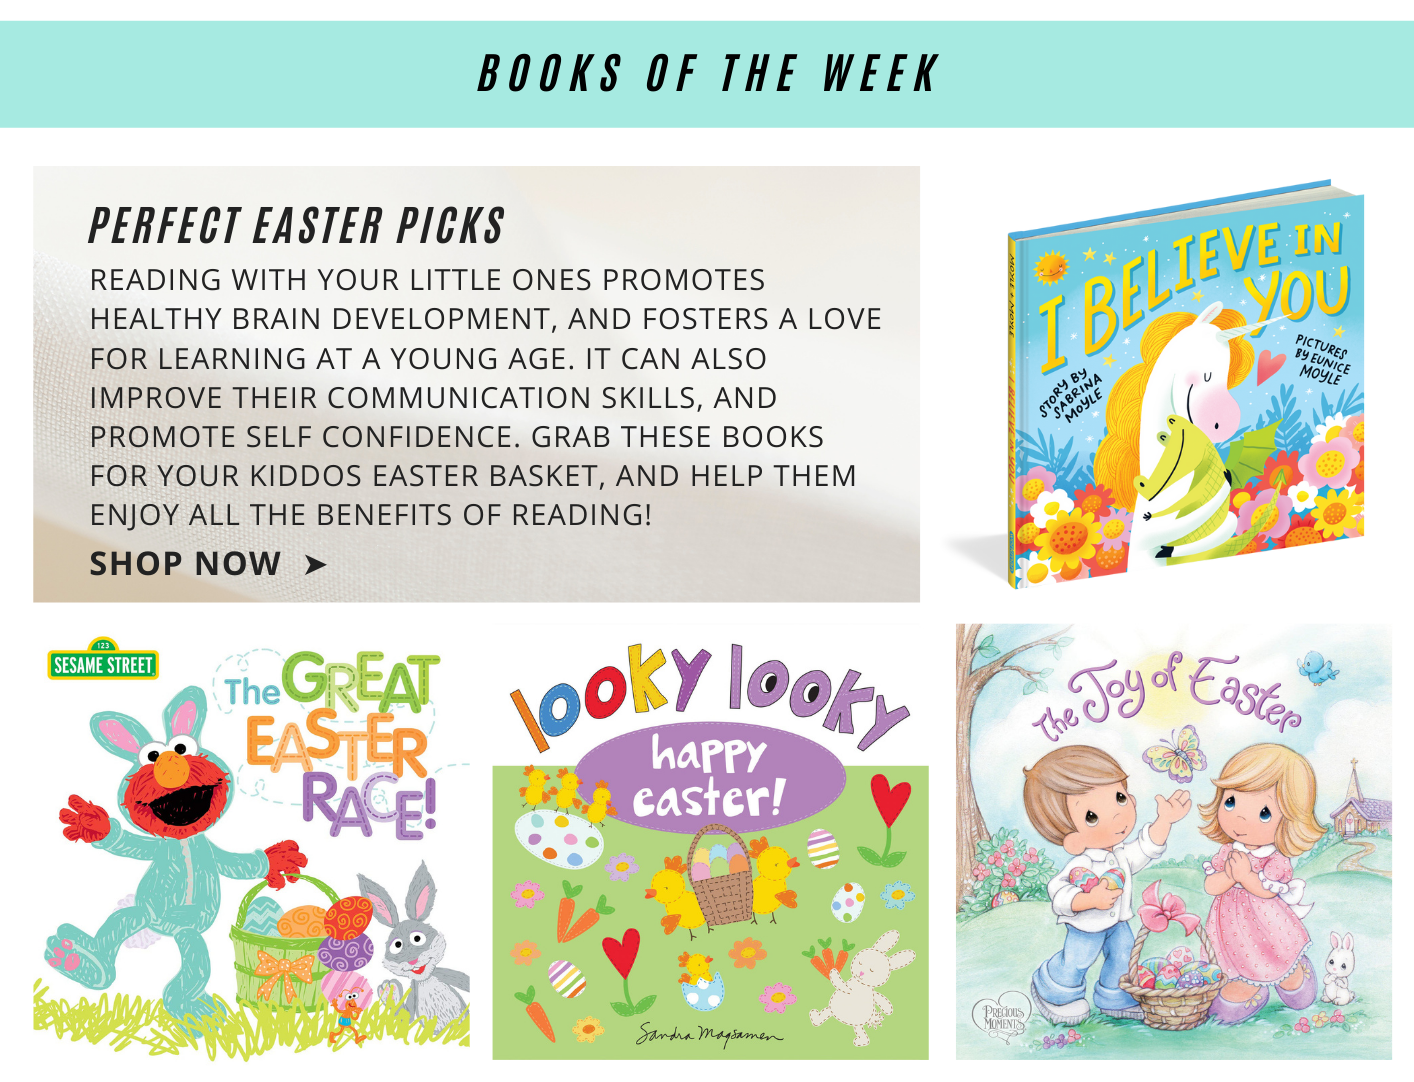 book features of the week